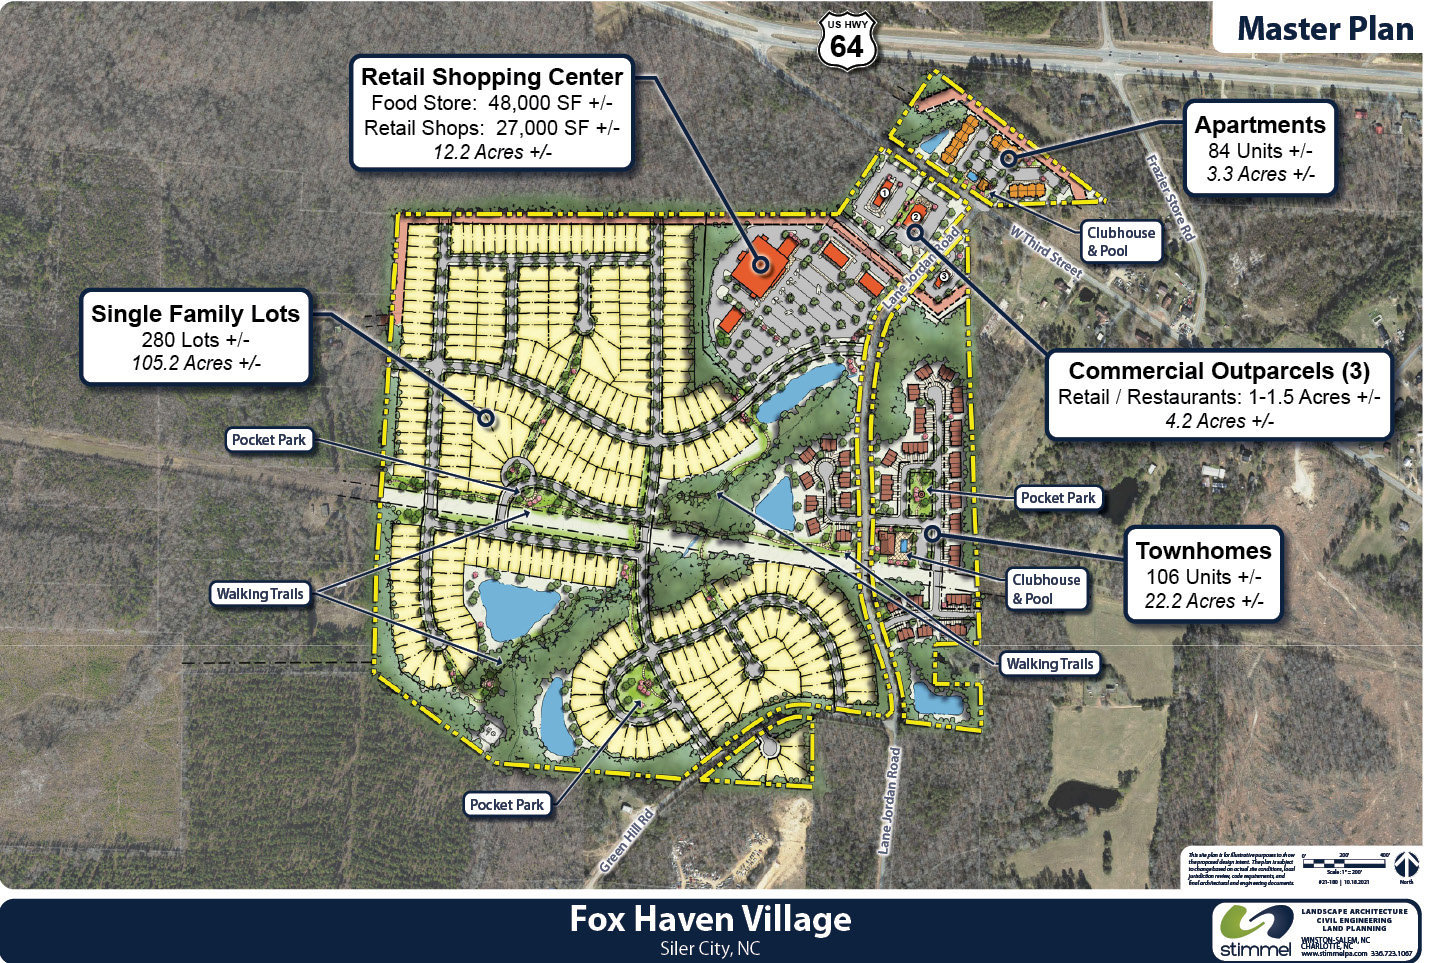 An earlier rendering of the plan for the Villages of Fox Haven. D.R. Homes officials say revised plans are being developed and shared soon.